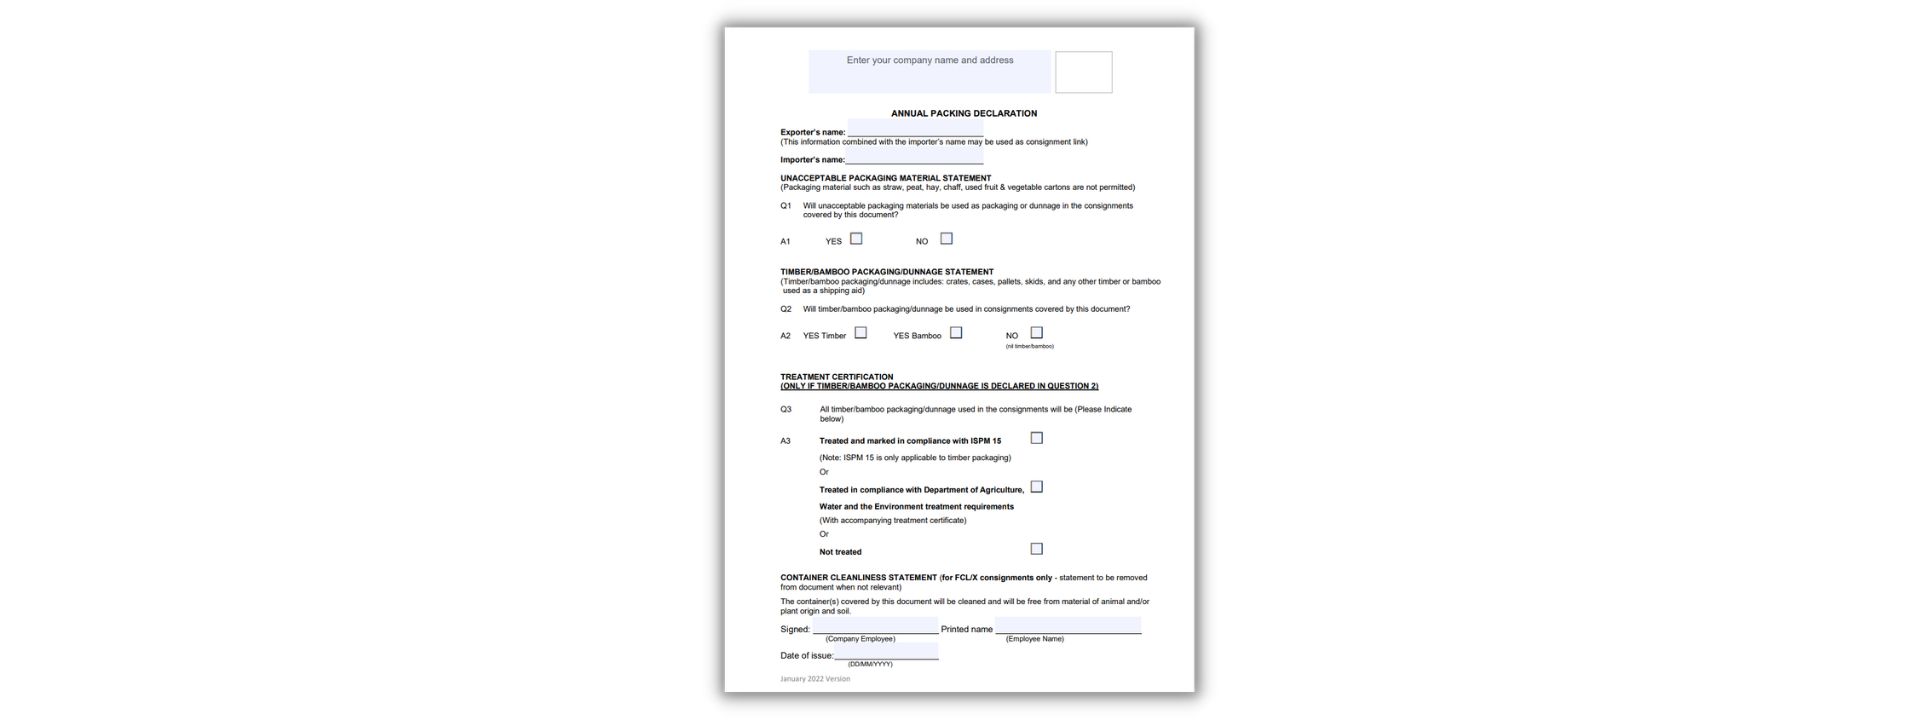 Packing Declaration: Definition And Template For Australian Customs